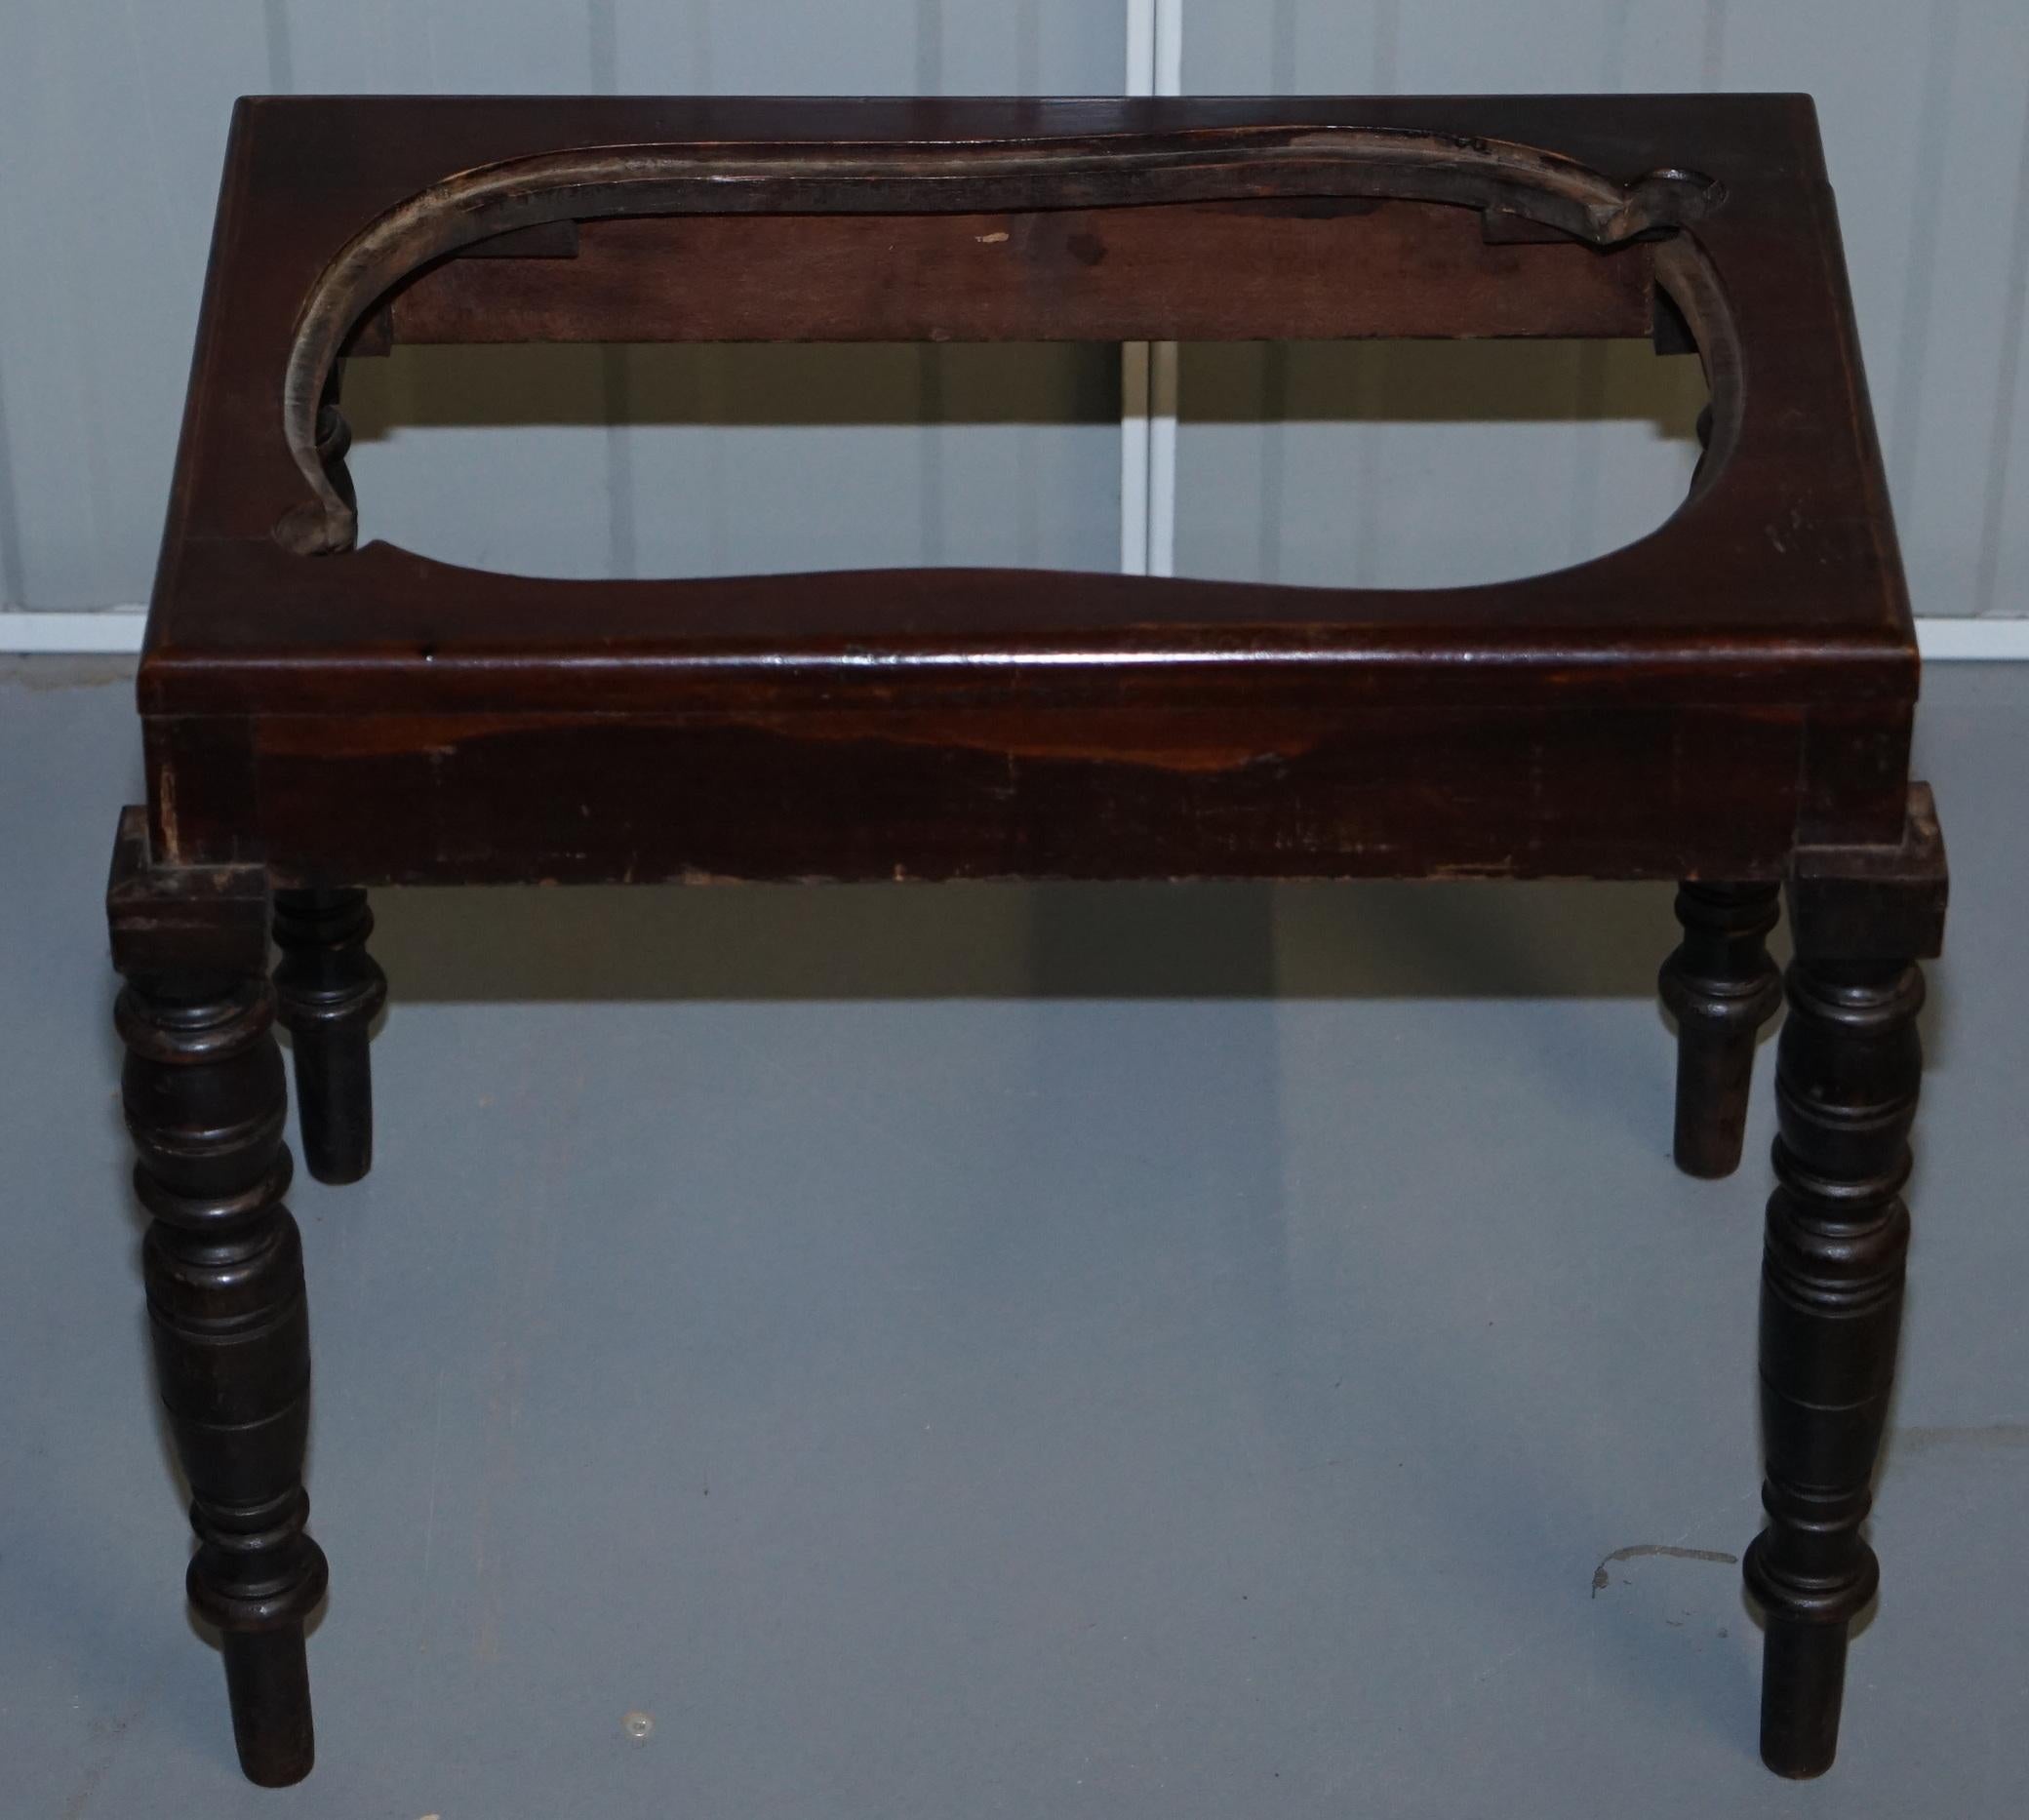 19th Century Victorian Side Table with Ceramic Stamped Porcelain Baby or Foot Bath Wash Basin